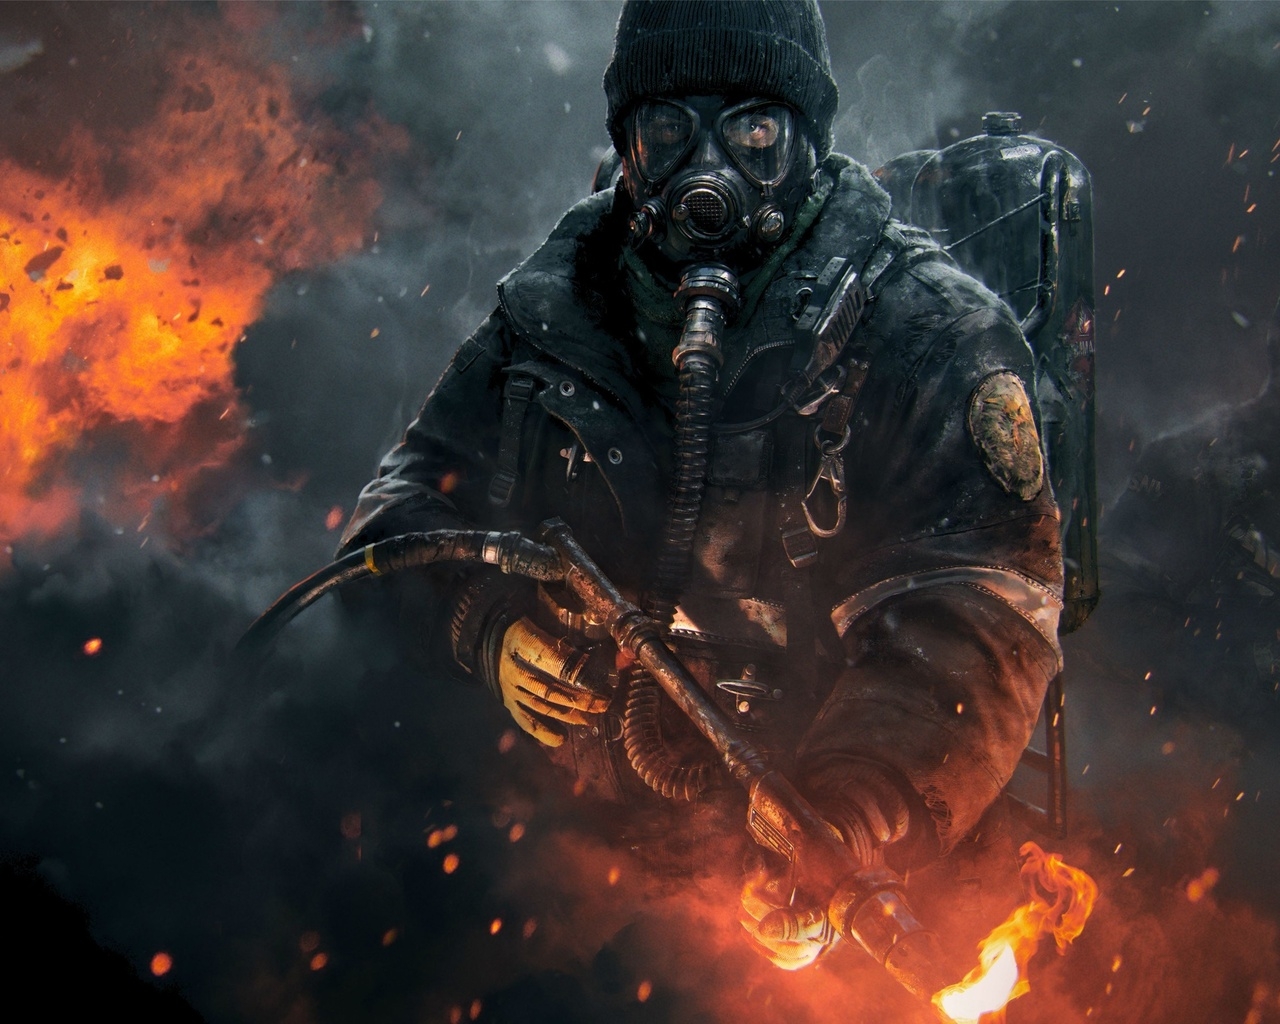 Tom Clancy's The Division for 1280 x 1024 resolution